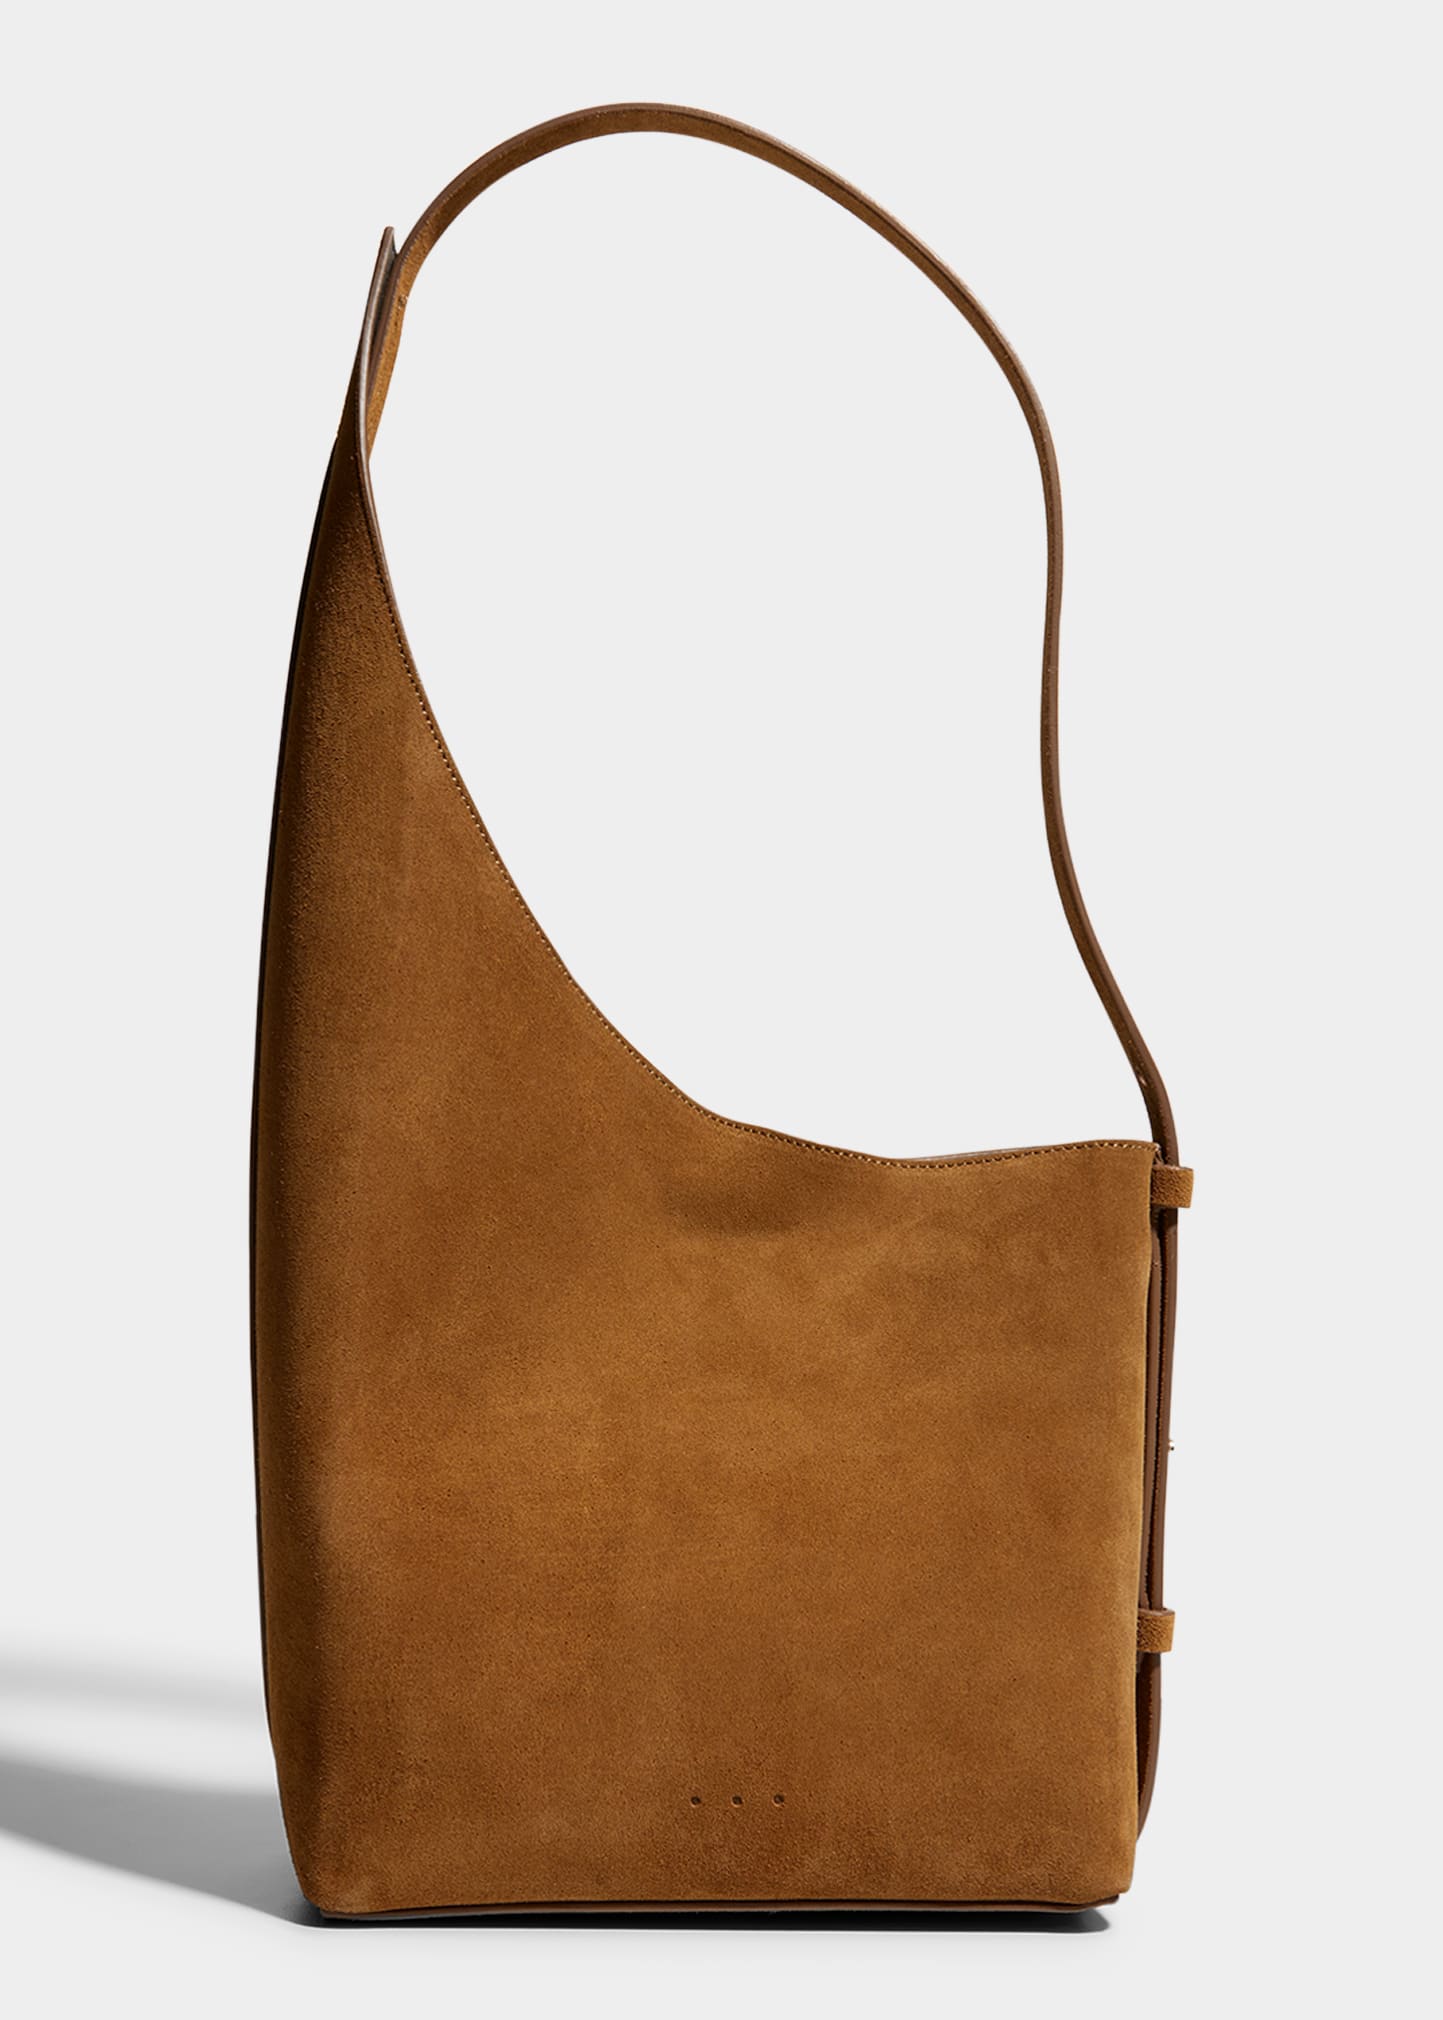 Aesther Ekme Demi Lune Suede Shoulder Bag In Tobacco